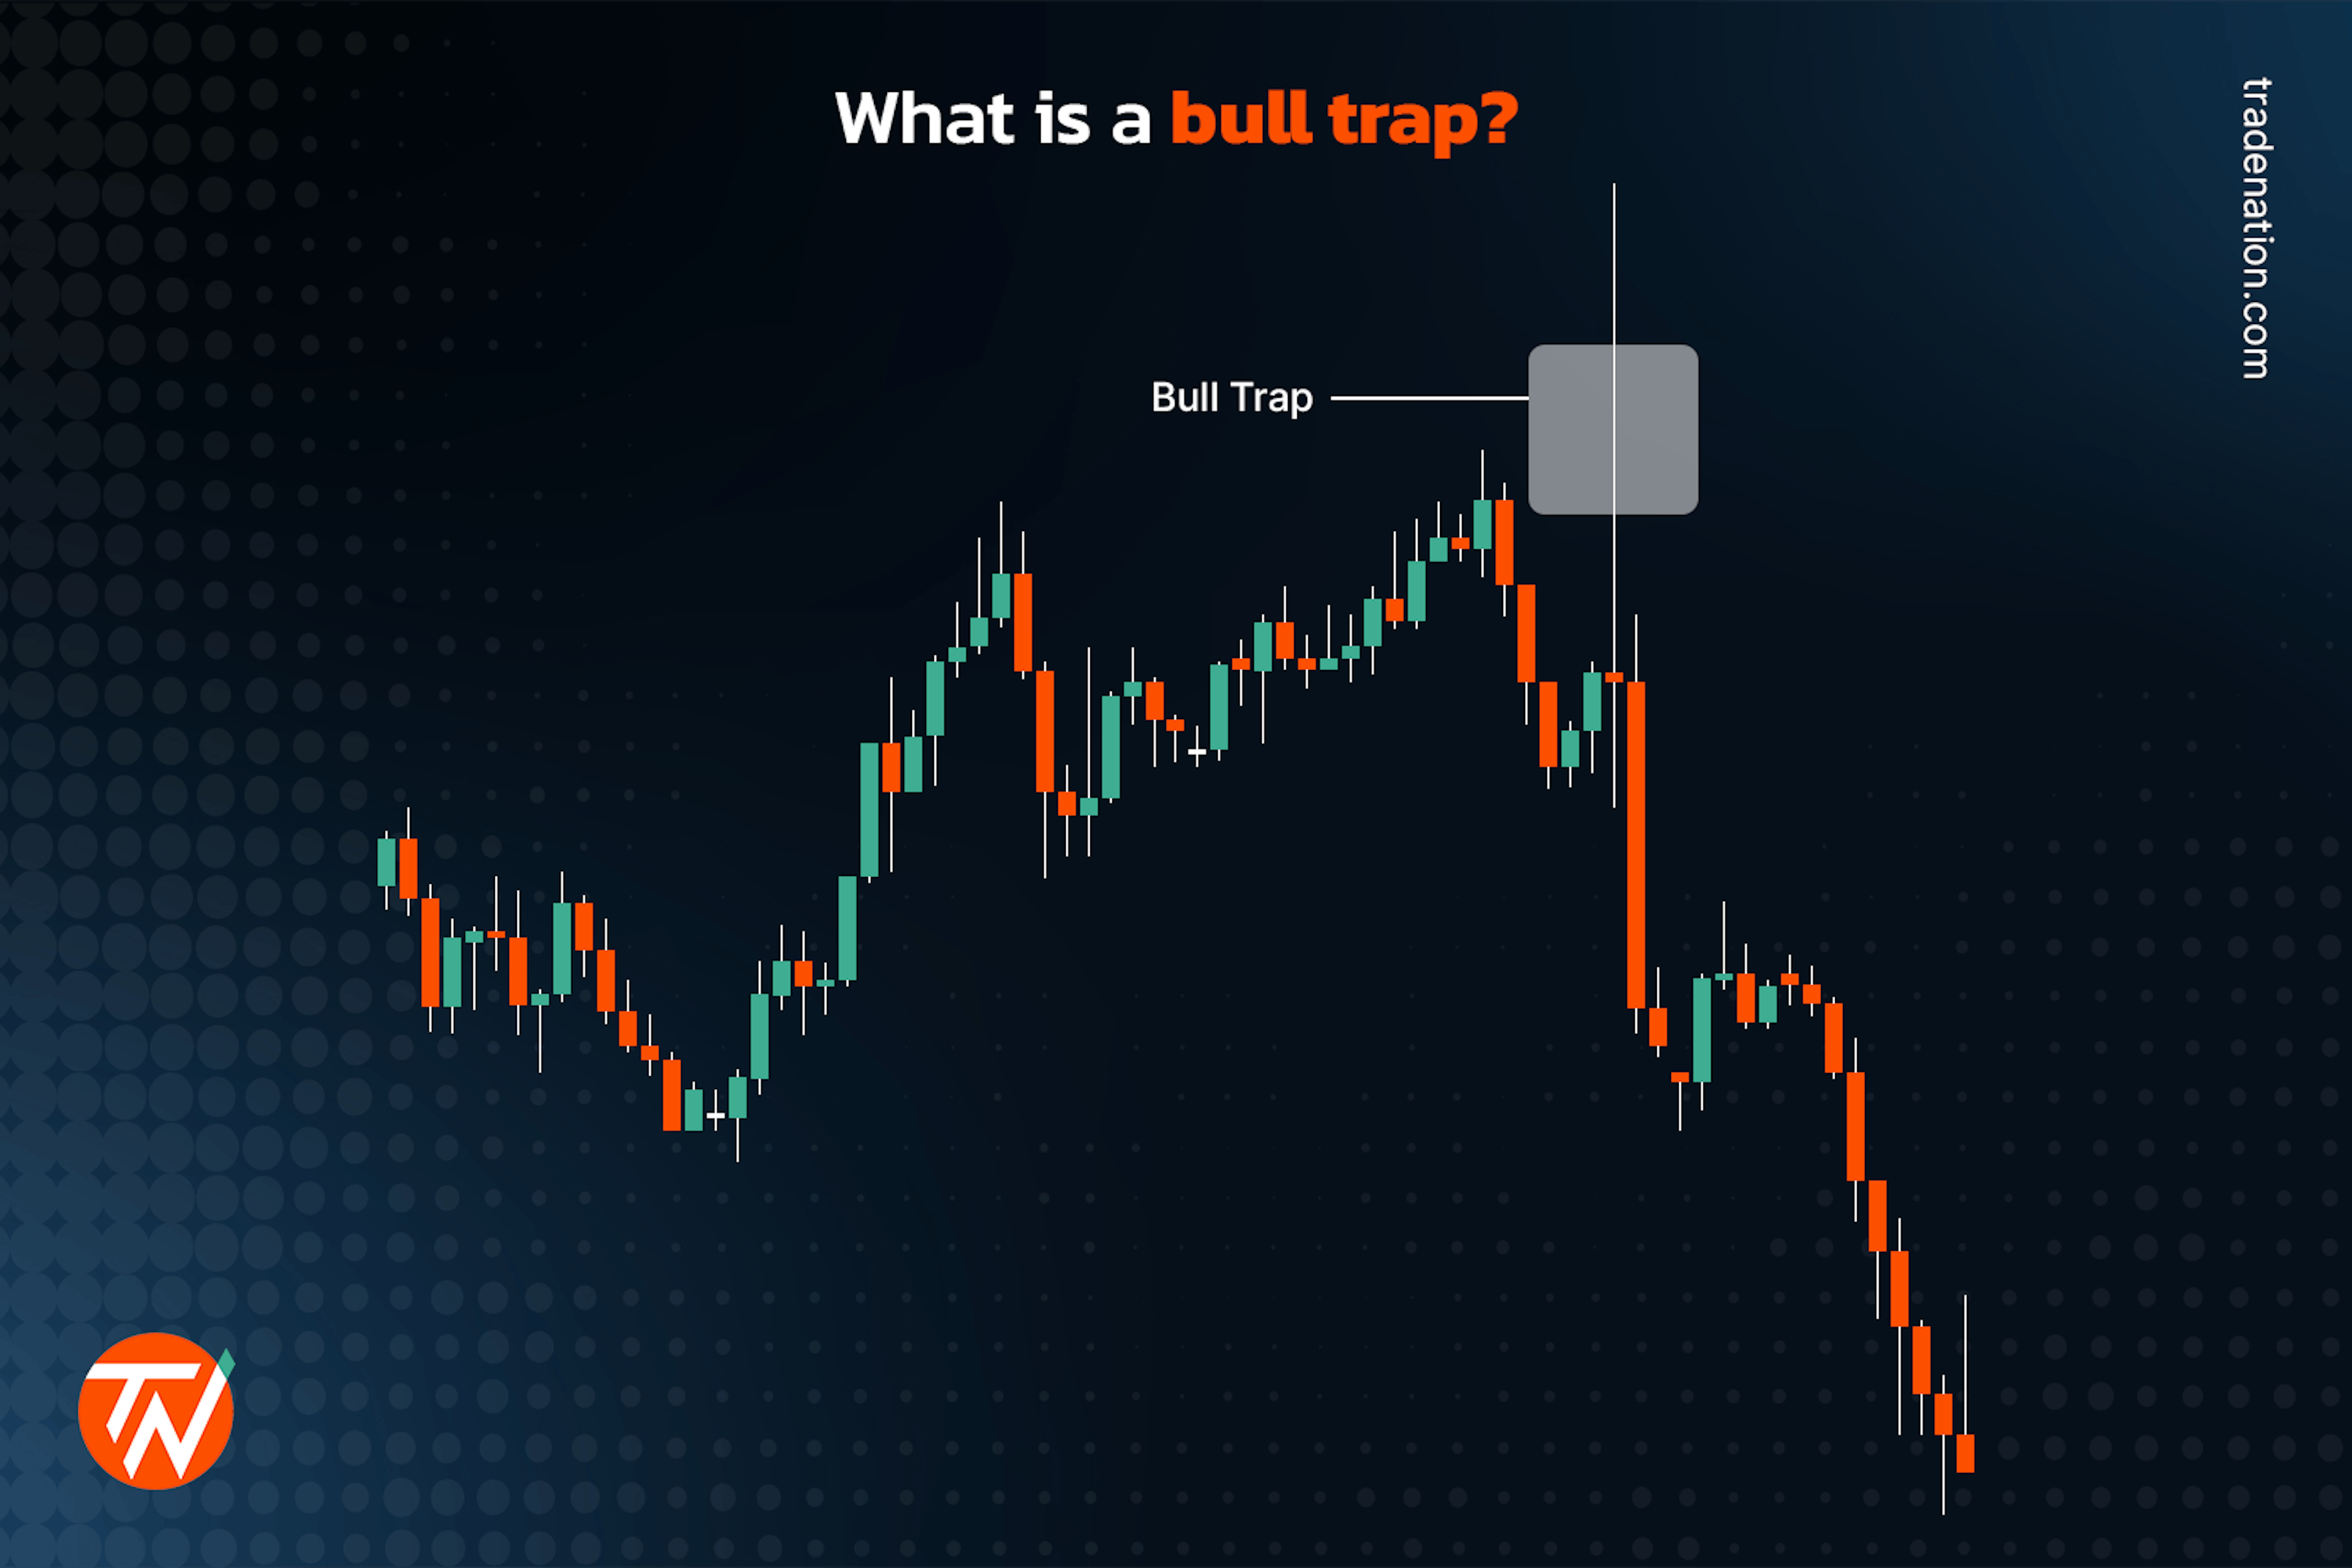 Bull trap demonstrated